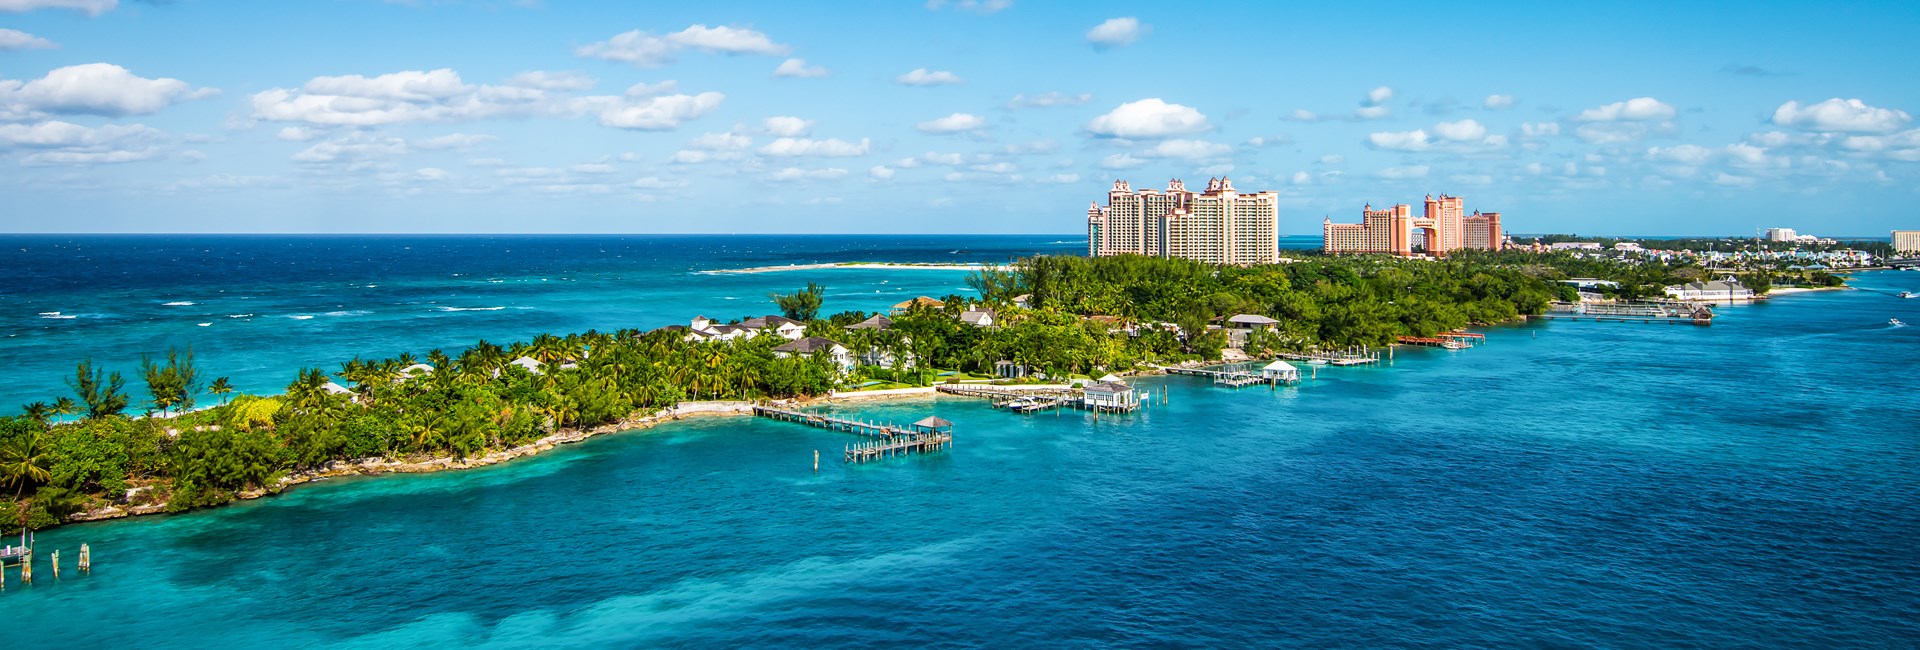 Tropical island with large hotel resorts in Bahamas